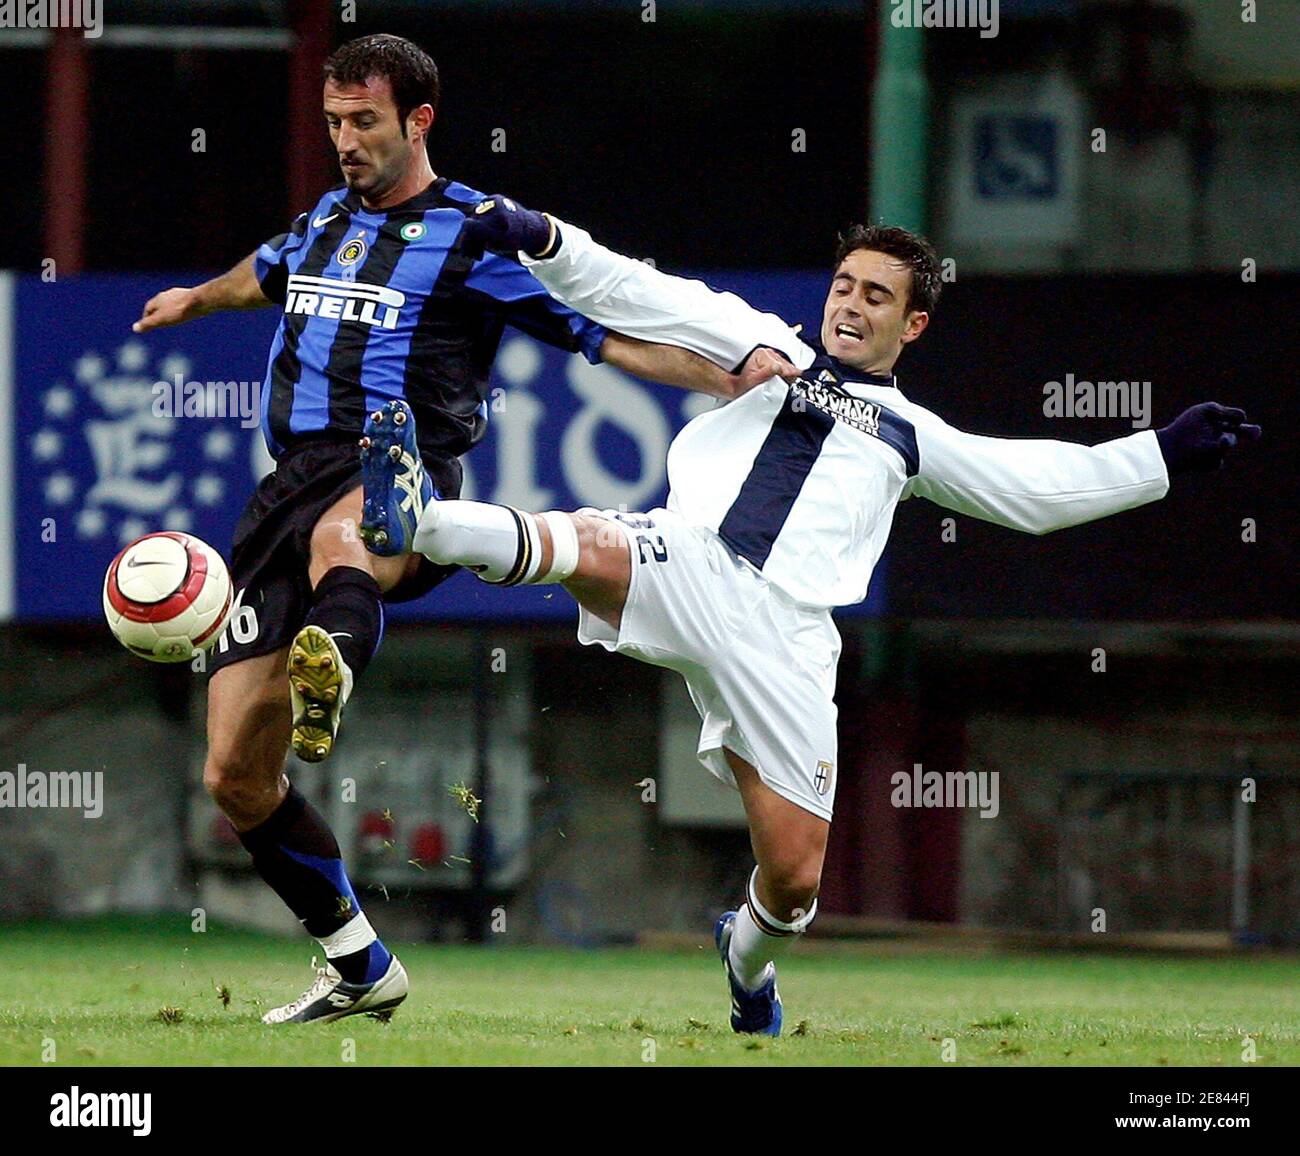 Inter Milan's Giuseppe Favalli (L) and Marco Marchionni of Parma fight for the ball during their Italian Serie A soccer match at the San Siro Stadium in Milan November 20, 2005. REUTERS/Daniele La Monaca Stock Photo